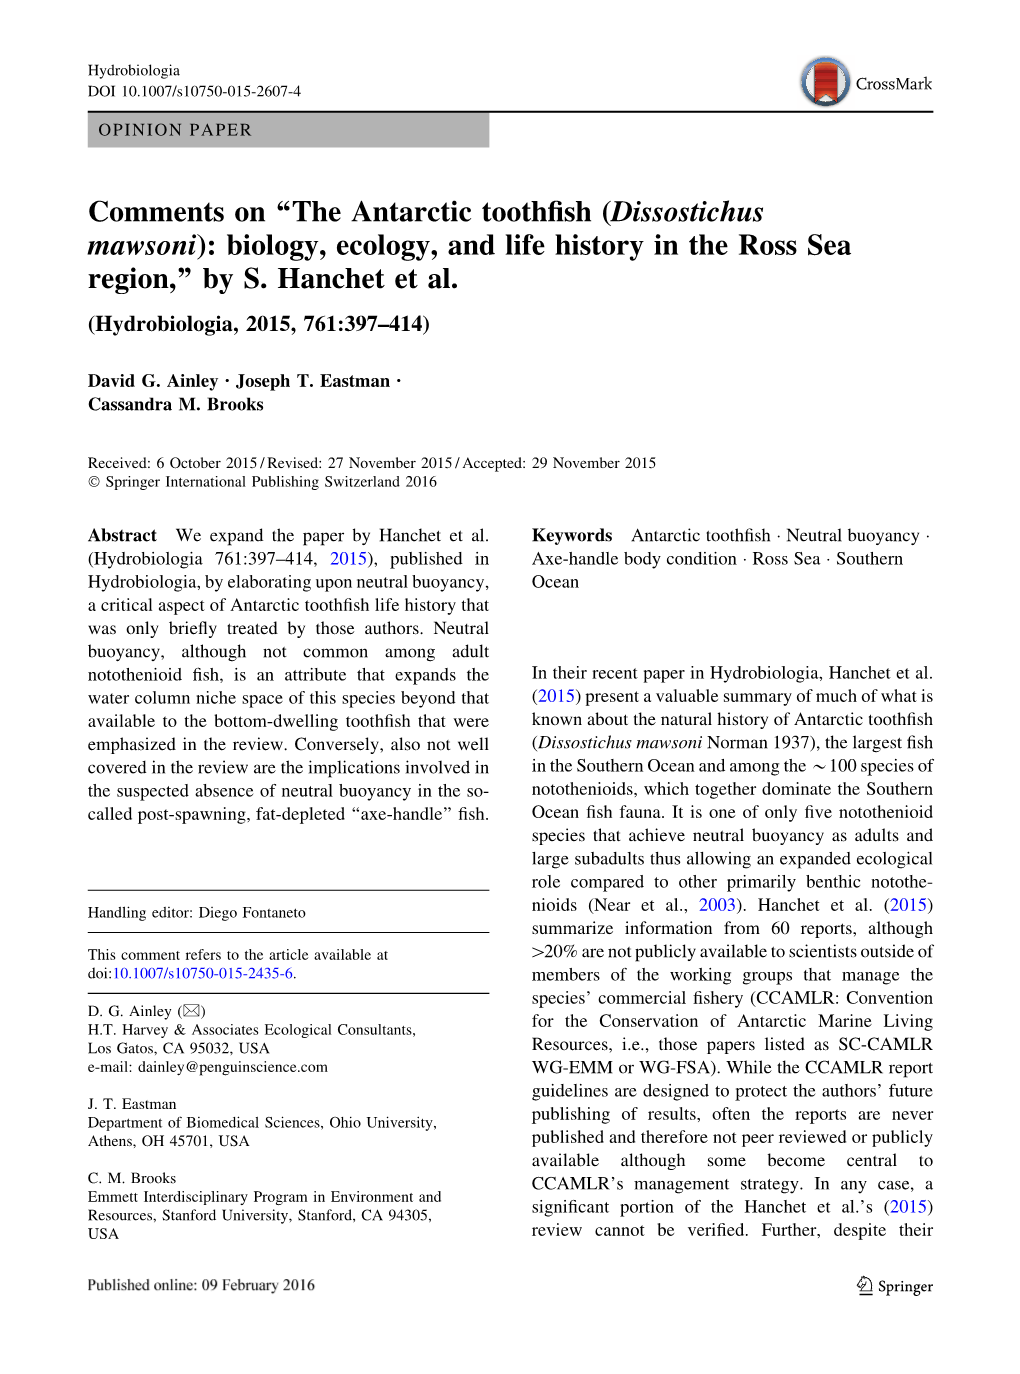 Comments on “The Antarctic Toothfish (Dissostichus Mawsoni): Biology, Ecology, and Life History in the Ross Sea Region,” By